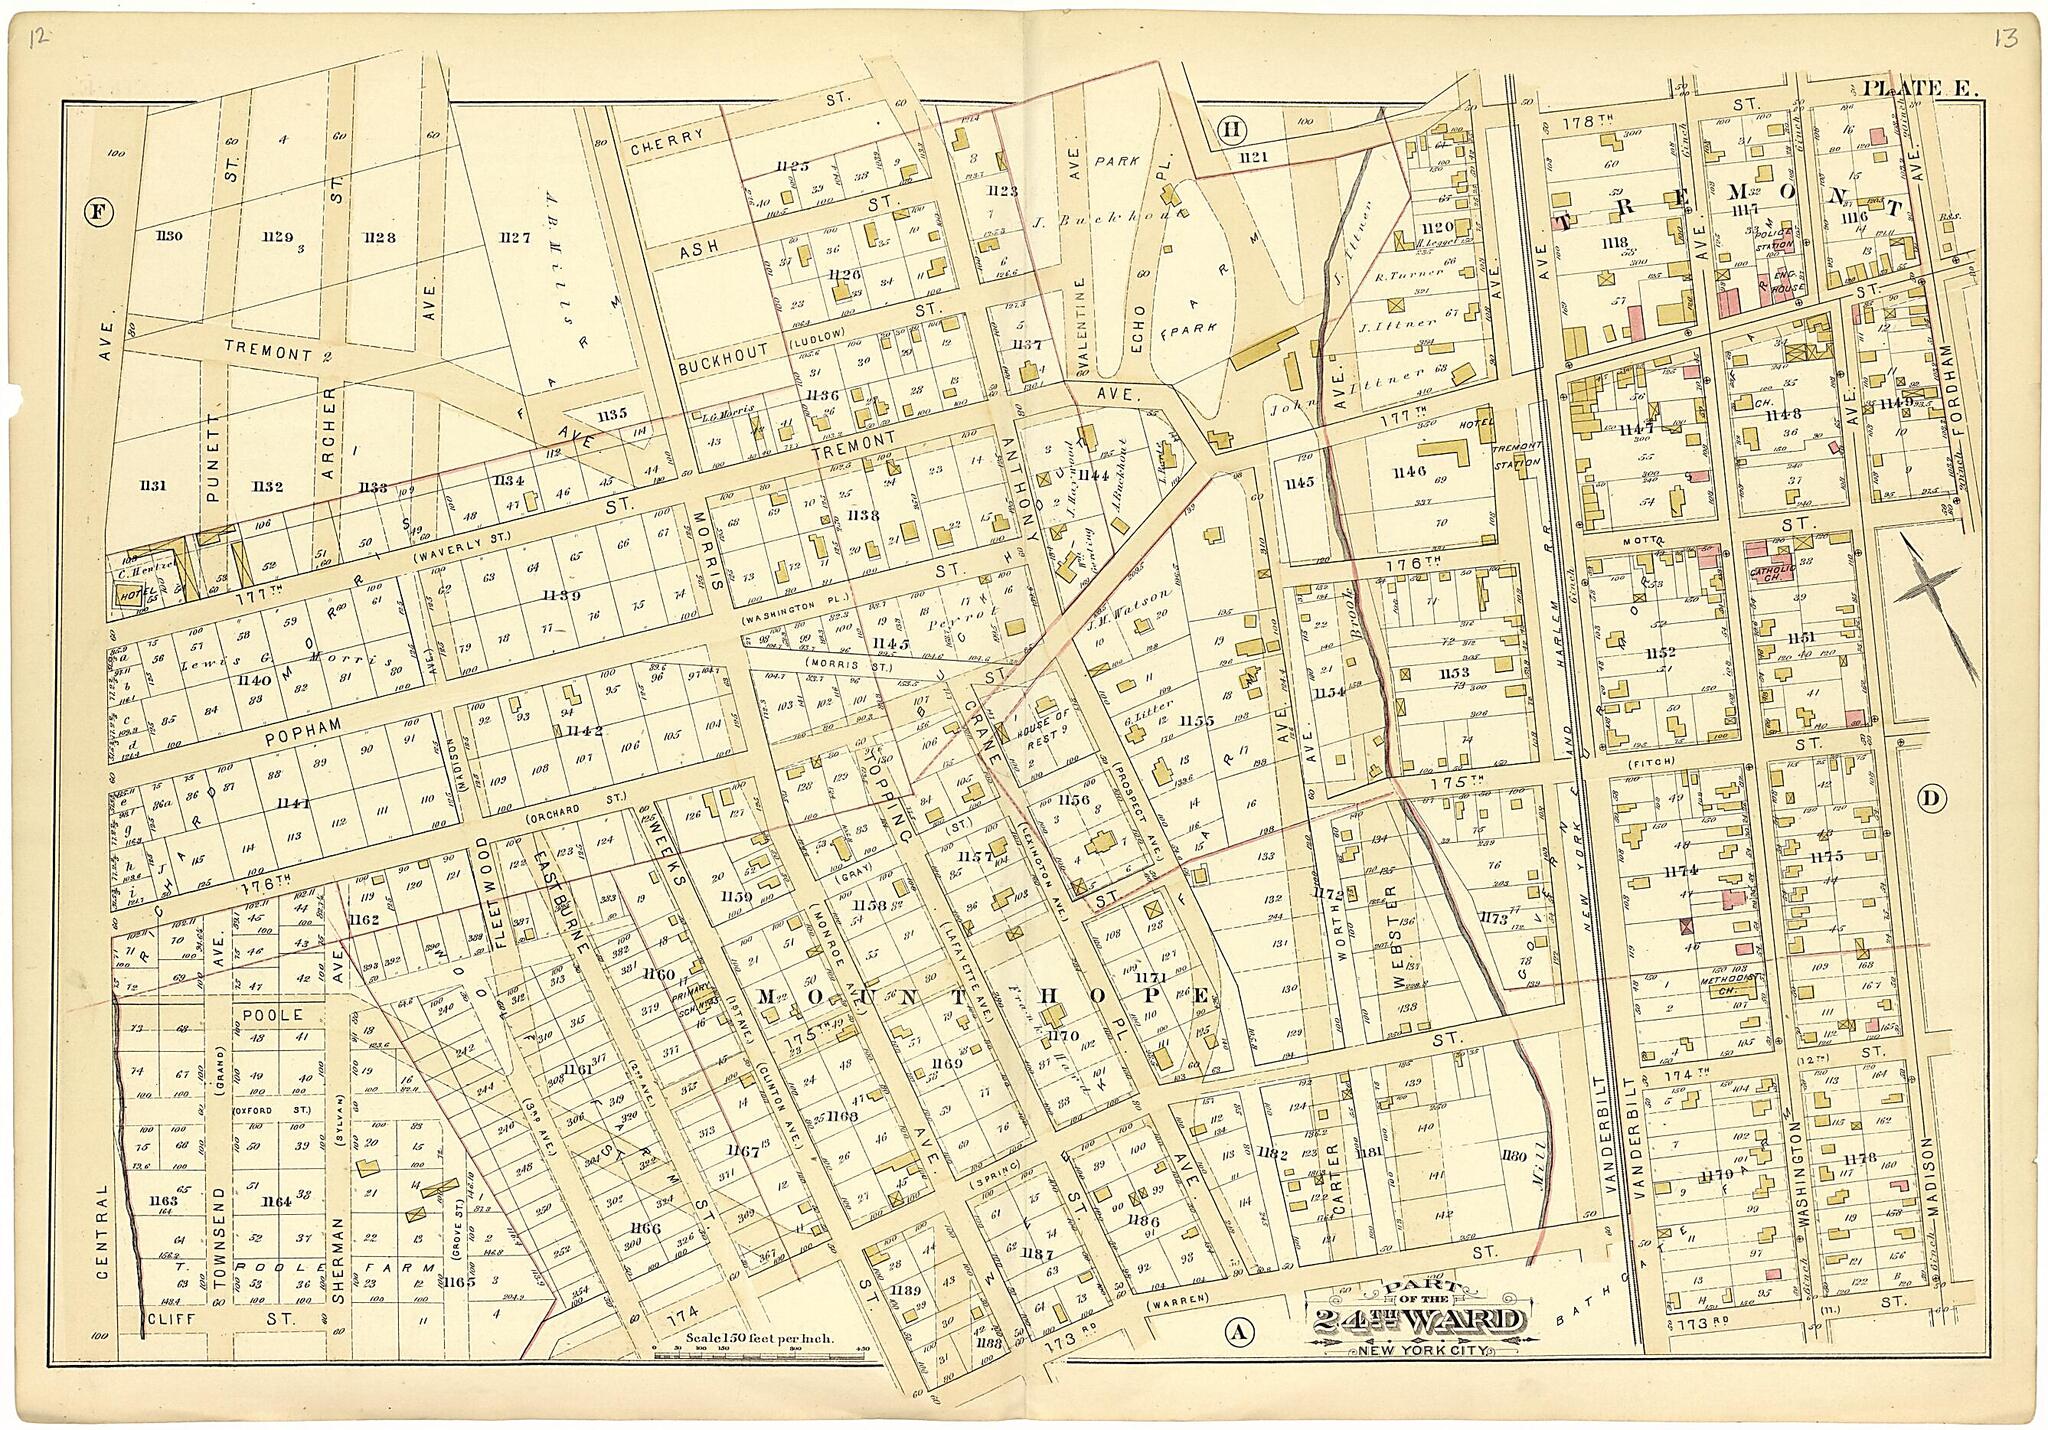 This old map of Part of the 24th Ward New York City - Plate E from Atlas of the Twenty Fourth Ward, New York City from 1882 was created by A. H. (August H.) Mueller in 1882